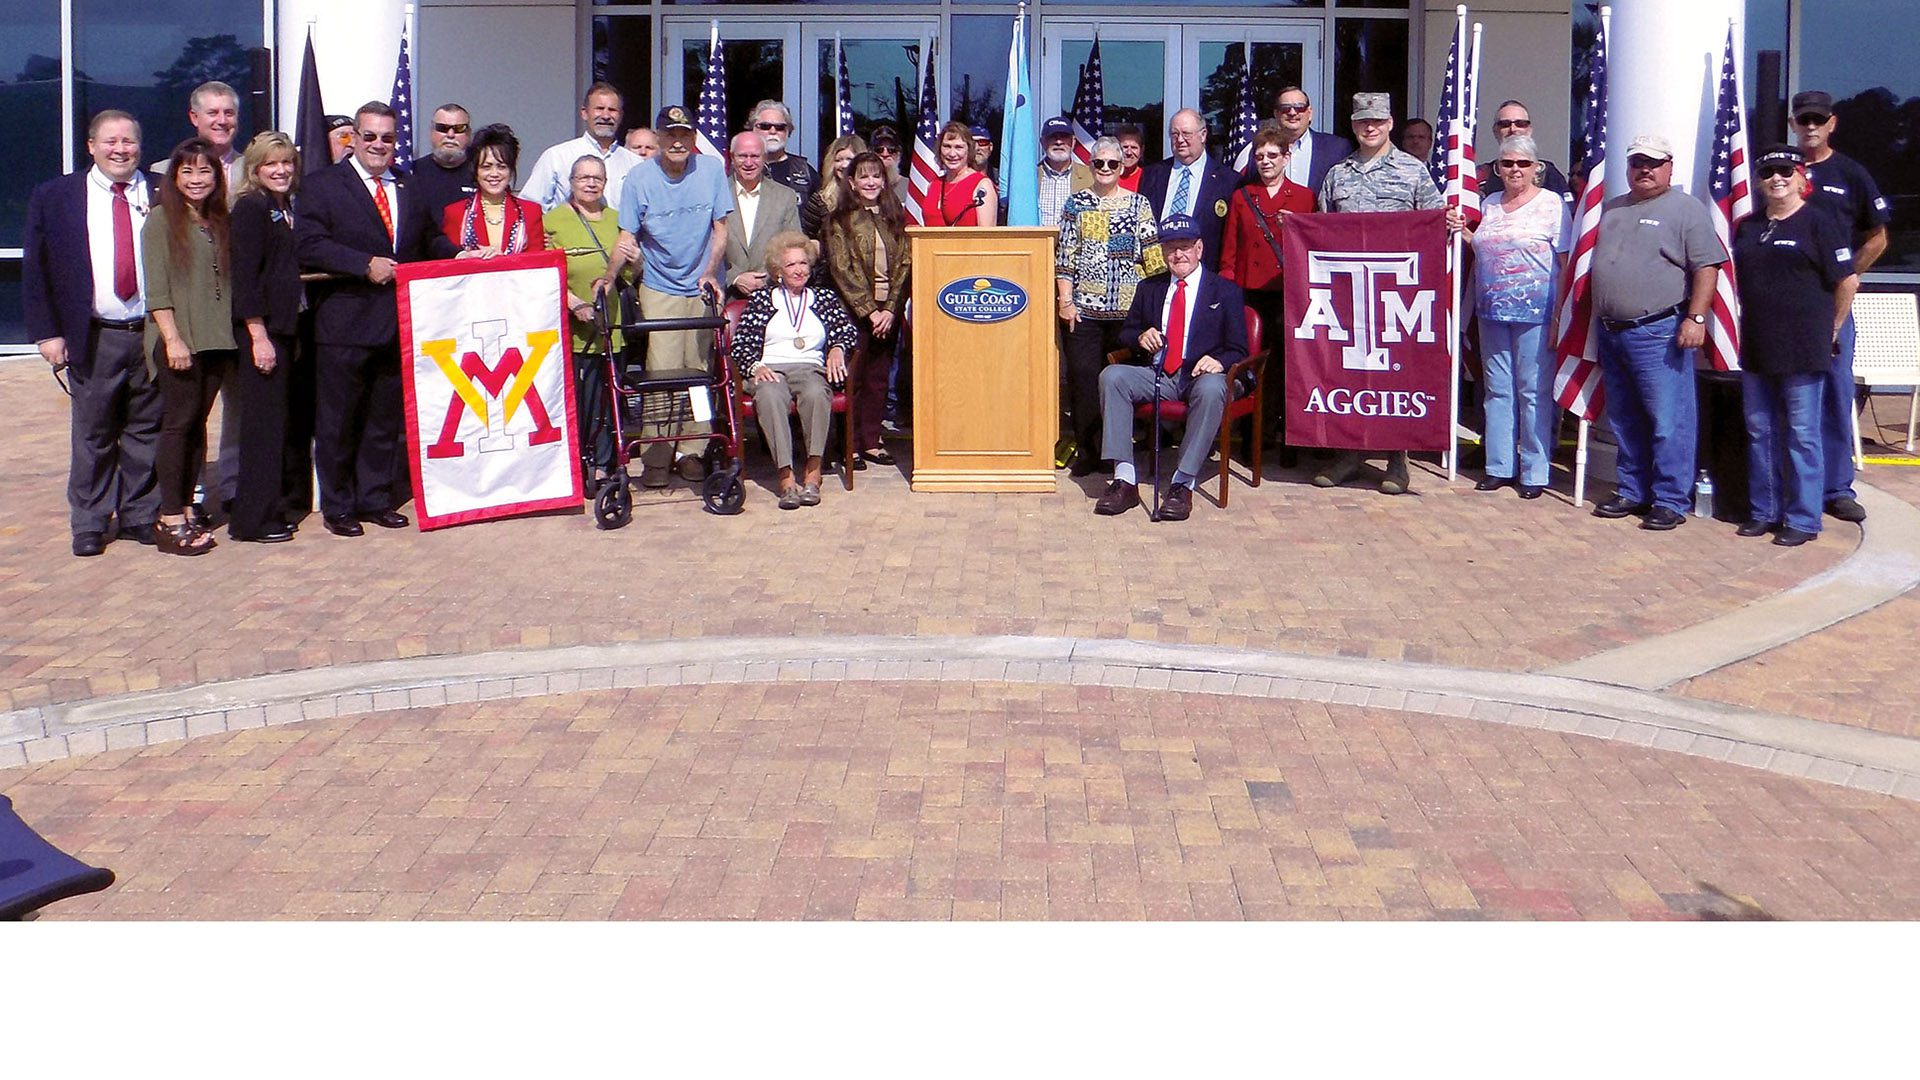 group of people smiling, holding VMI and Texas A&M flags